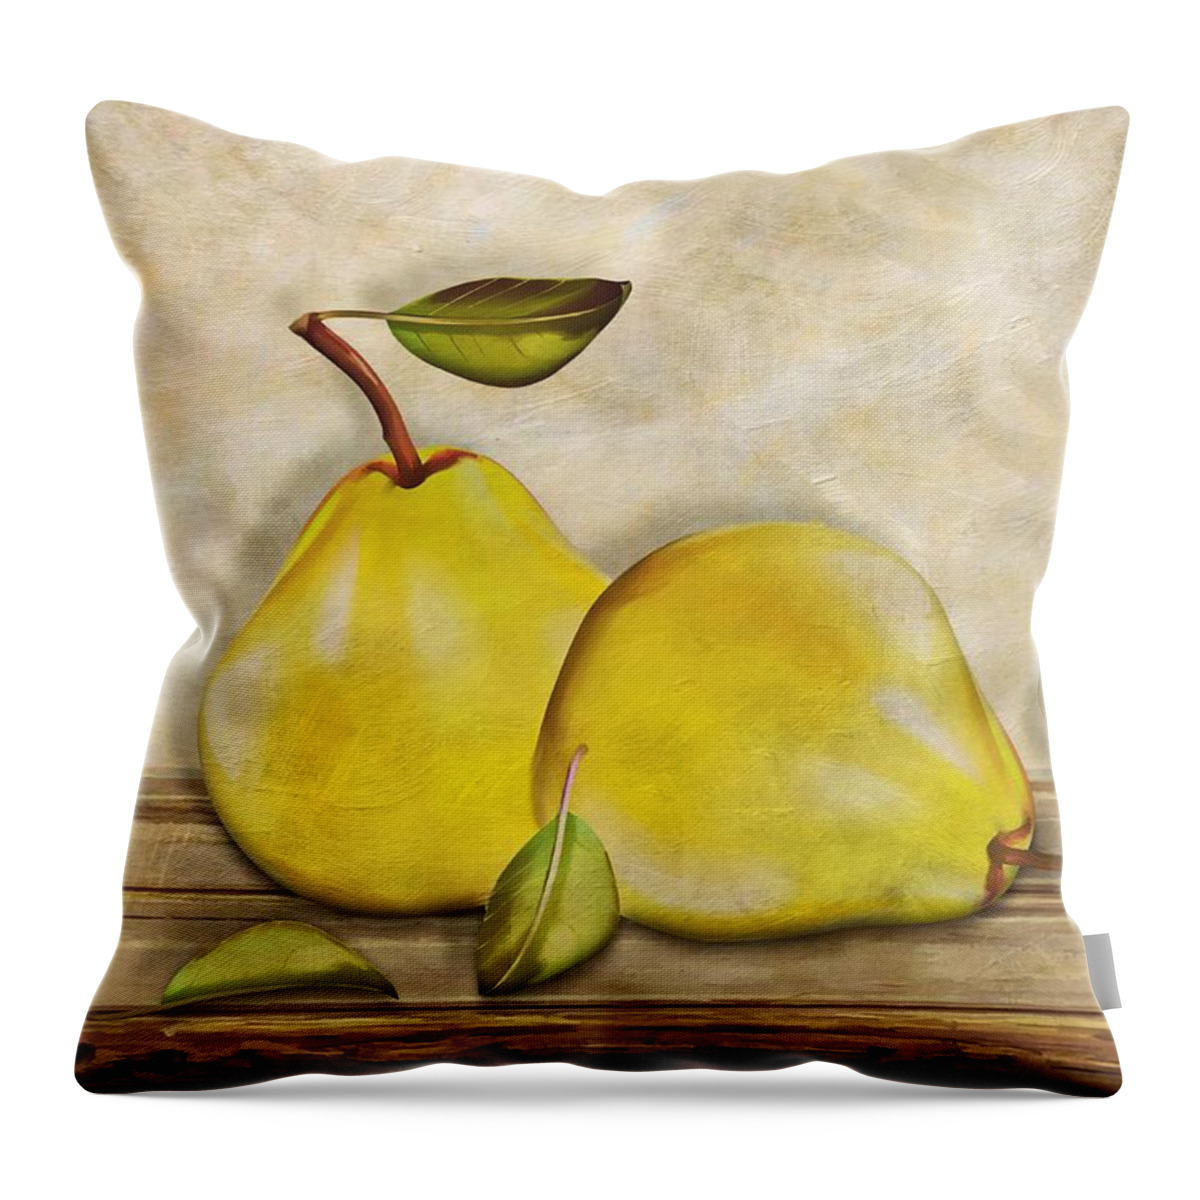 Pair Of Pears Throw Pillow featuring the digital art Pair of Pears by Nina Bradica